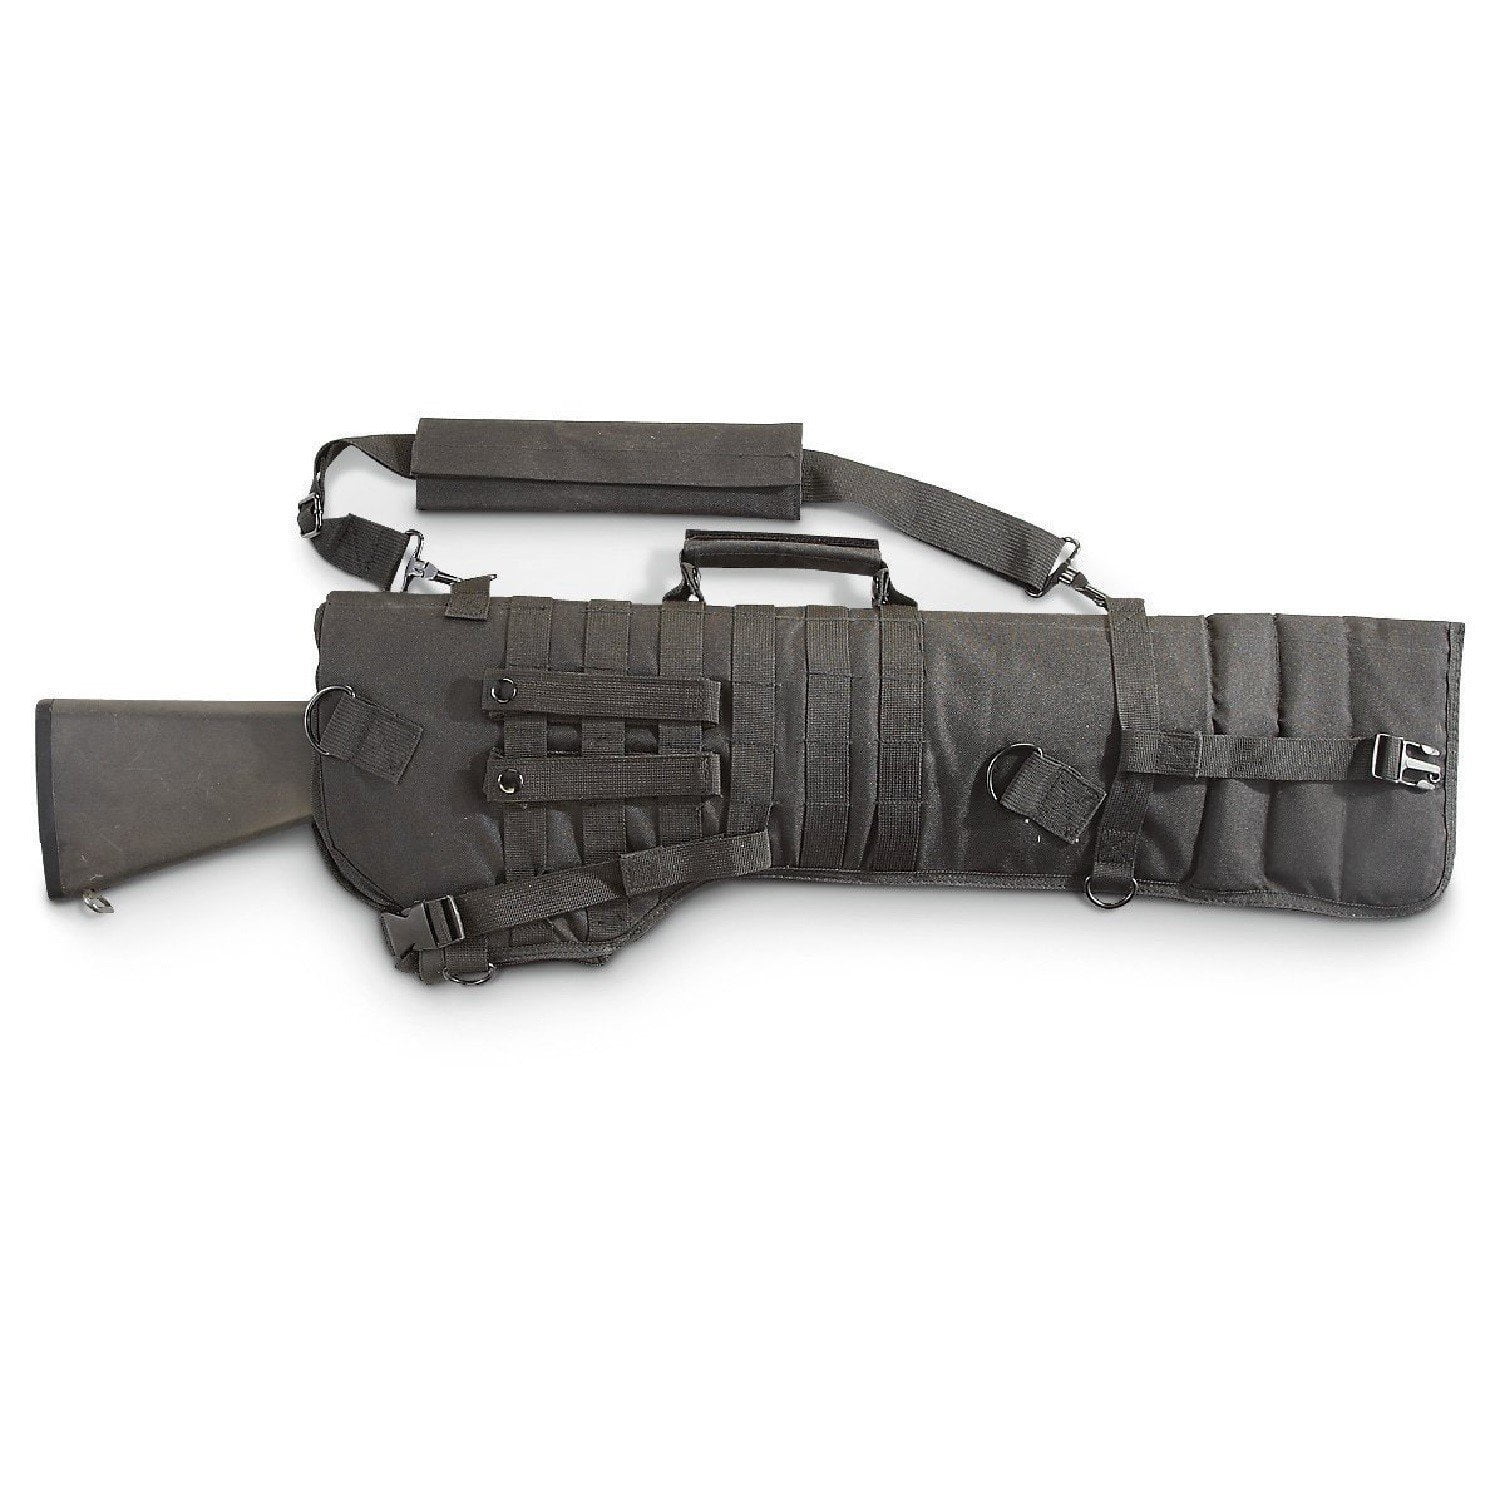 Large Tactical Rifle Case Security Padded Gun Bag MOLLE Airsoft Shooting Black 